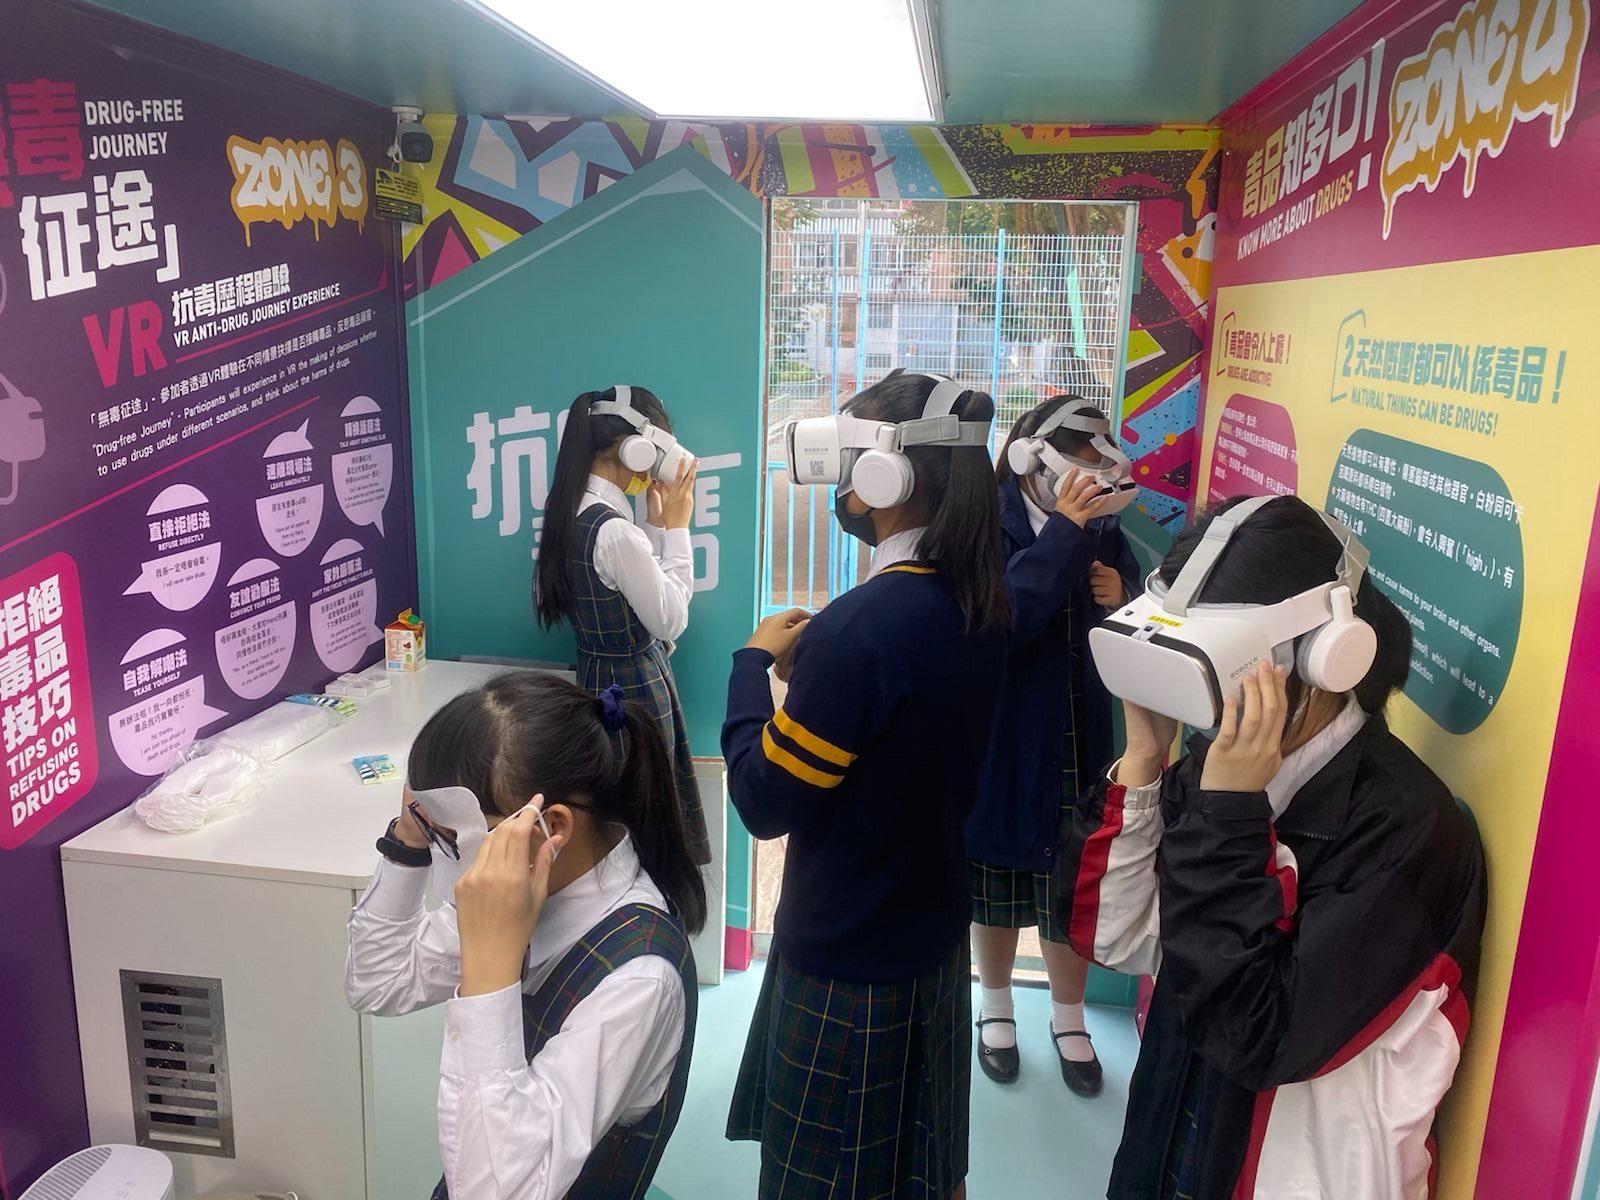 The "Anti-Drug On The Go" mobile exhibition vehicle operated by the Youth Crime Prevention Centre of the Hong Kong Federation of Youth Groups, engaged by the Narcotics Division of the Security Bureau, will resume service starting from tomorrow (April 23). The vehicle features various anti-drug games, an anti-drug self-assessment station, a virtual reality (VR) anti-drug experience game and an anti-drug message photo-spot on the vehicle, so that the public may learn about the harm caused by drug abuse in an interactive manner. Photo shows students experiencing a VR anti-drug game.